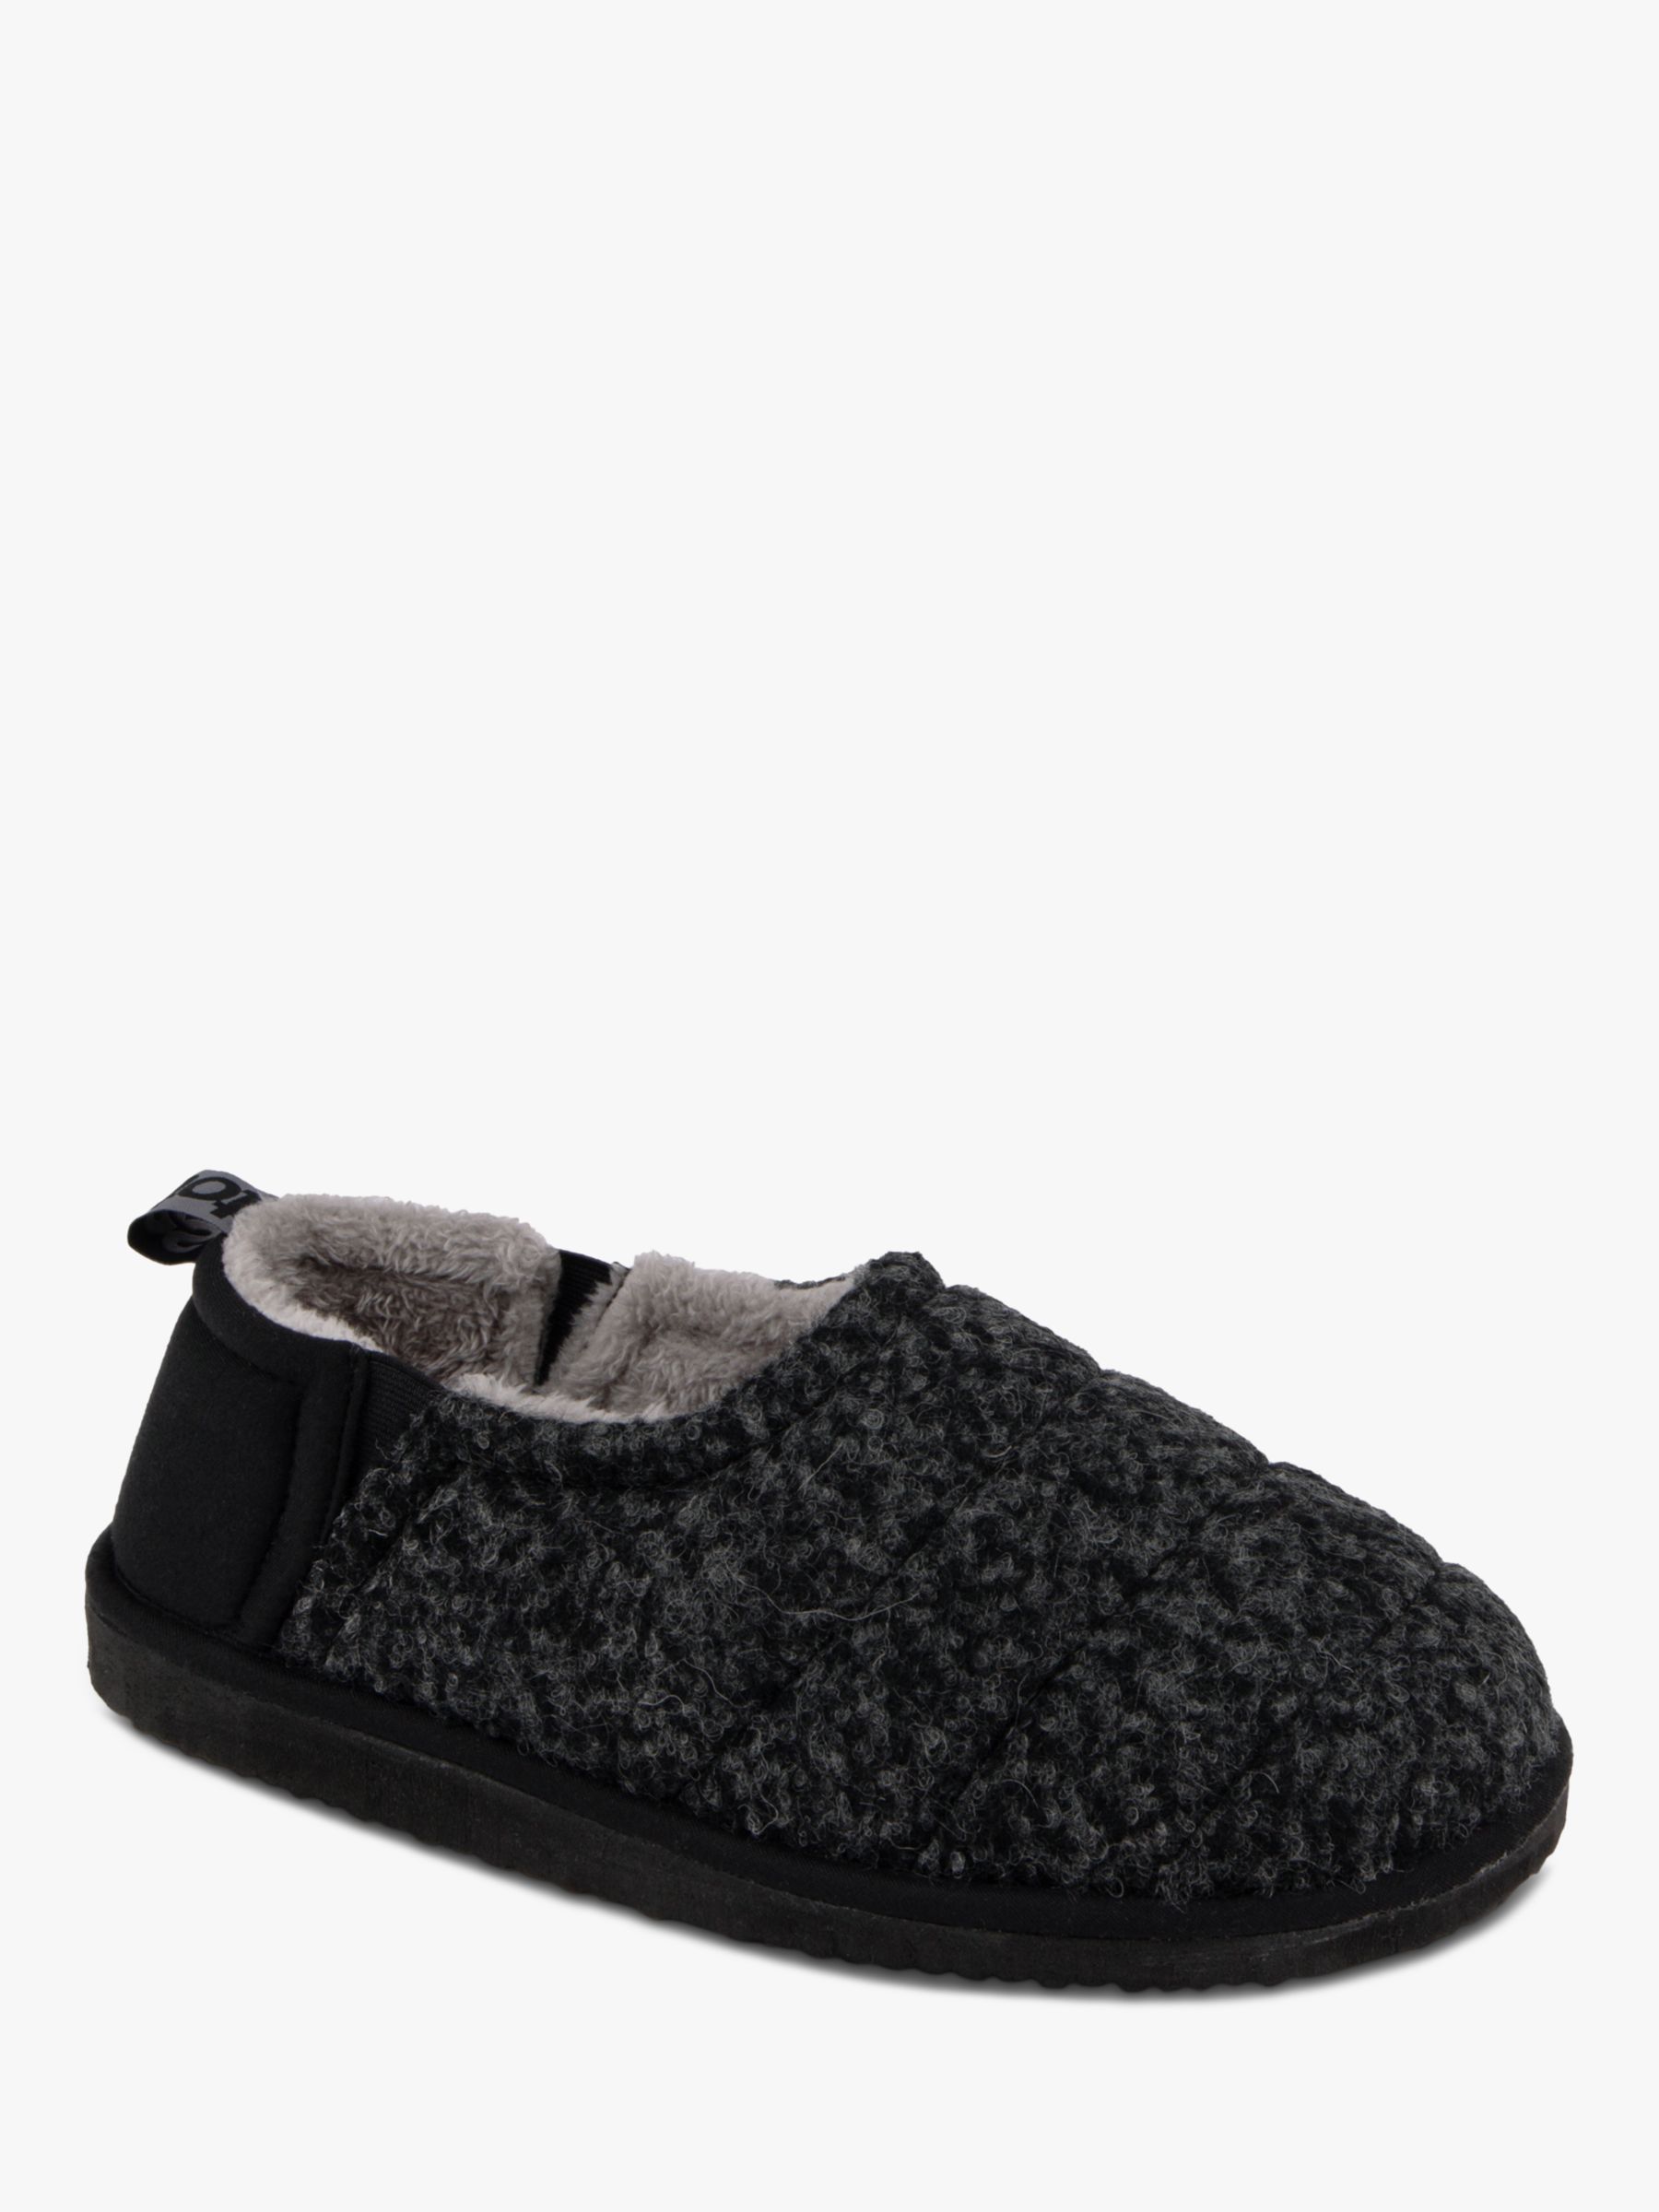 totes Quilted Full Back Slippers, Black at John Lewis & Partners